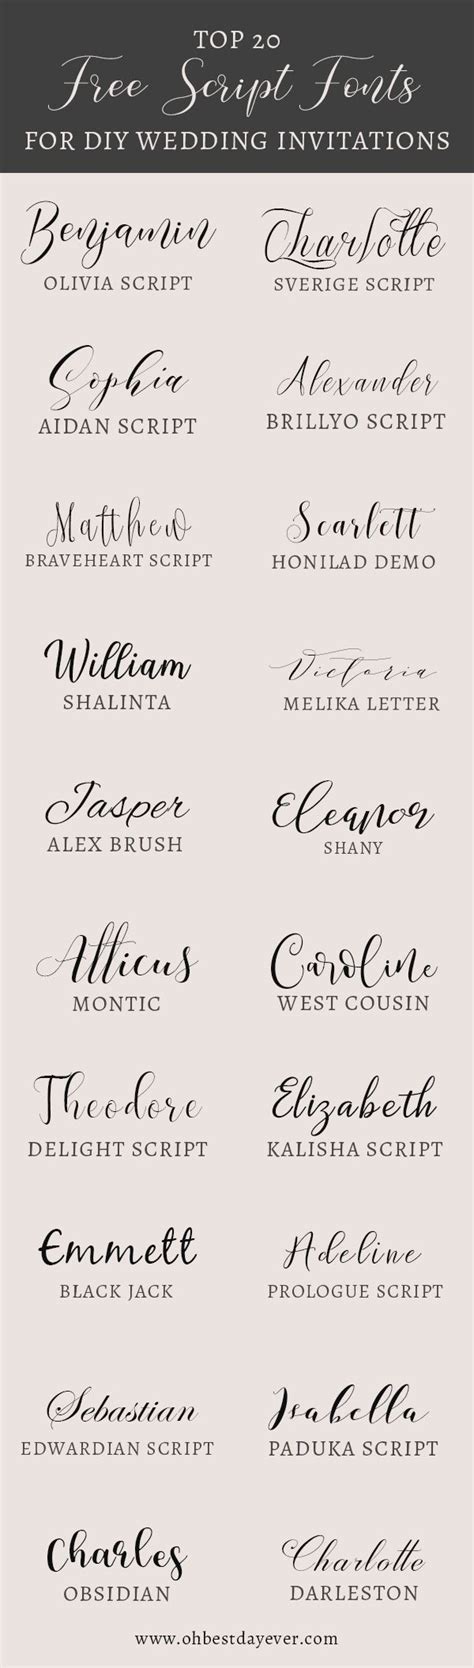 20 Fancy Free Script Fonts For Diy Wedding Invitations Oh Best Day